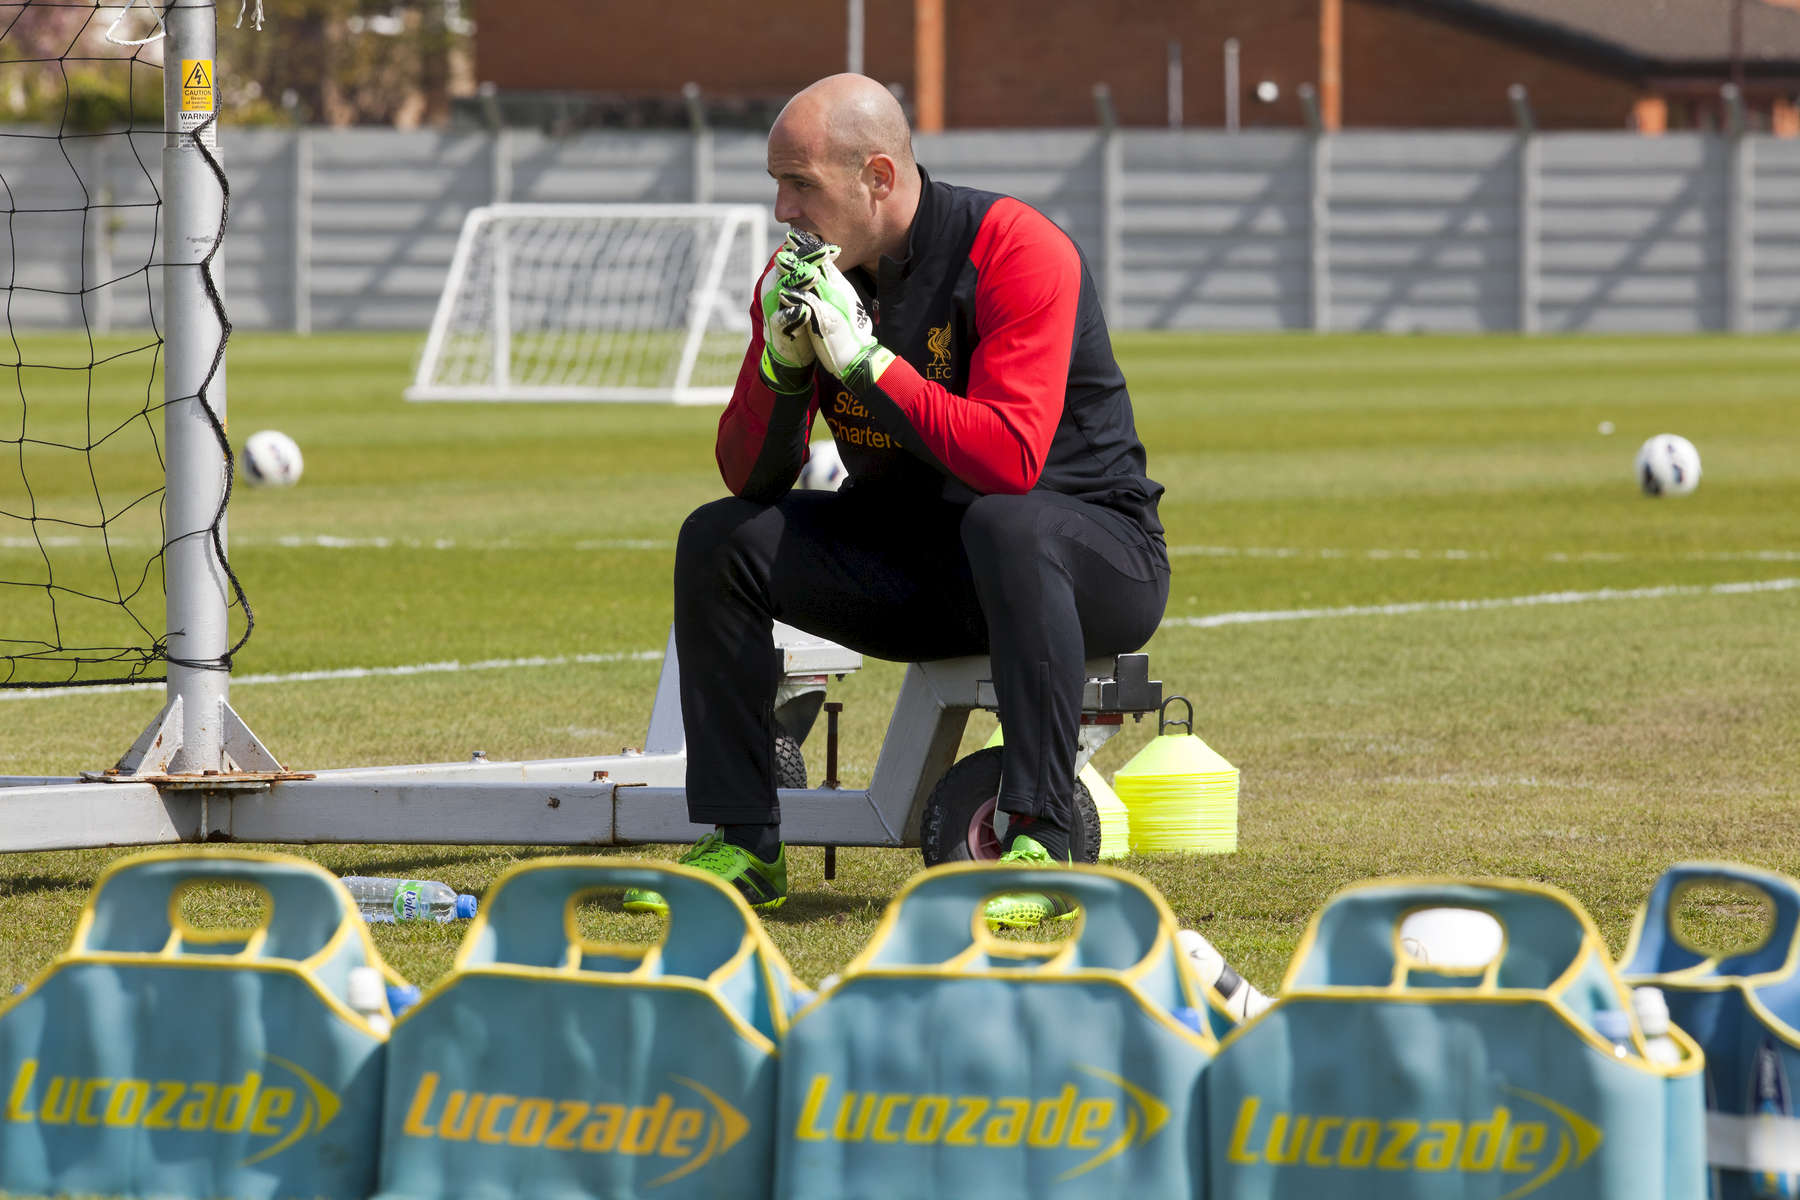 Liverpool FC goalkeeper Pepe Reina takes a break from training at Melwood.Melwood is the Liverpool FC training ground, located in the West Derby area of Liverpool. It is seperate from the Liverpool Academy, which is based in Kirkby.Melwood was redeveloped in the early 2000′s with large input from then-manager Gerard Houllier and now features some of the best facilities in Europe. It has been the club’s training ground since the fifties and was previously transformed into a top class facility by Bill Shankly.Facilities include sythetic pitches, rehabilitation rooms, press and meeting rooms, gymnasium, swimming pool, restaurant and recreational facilities.